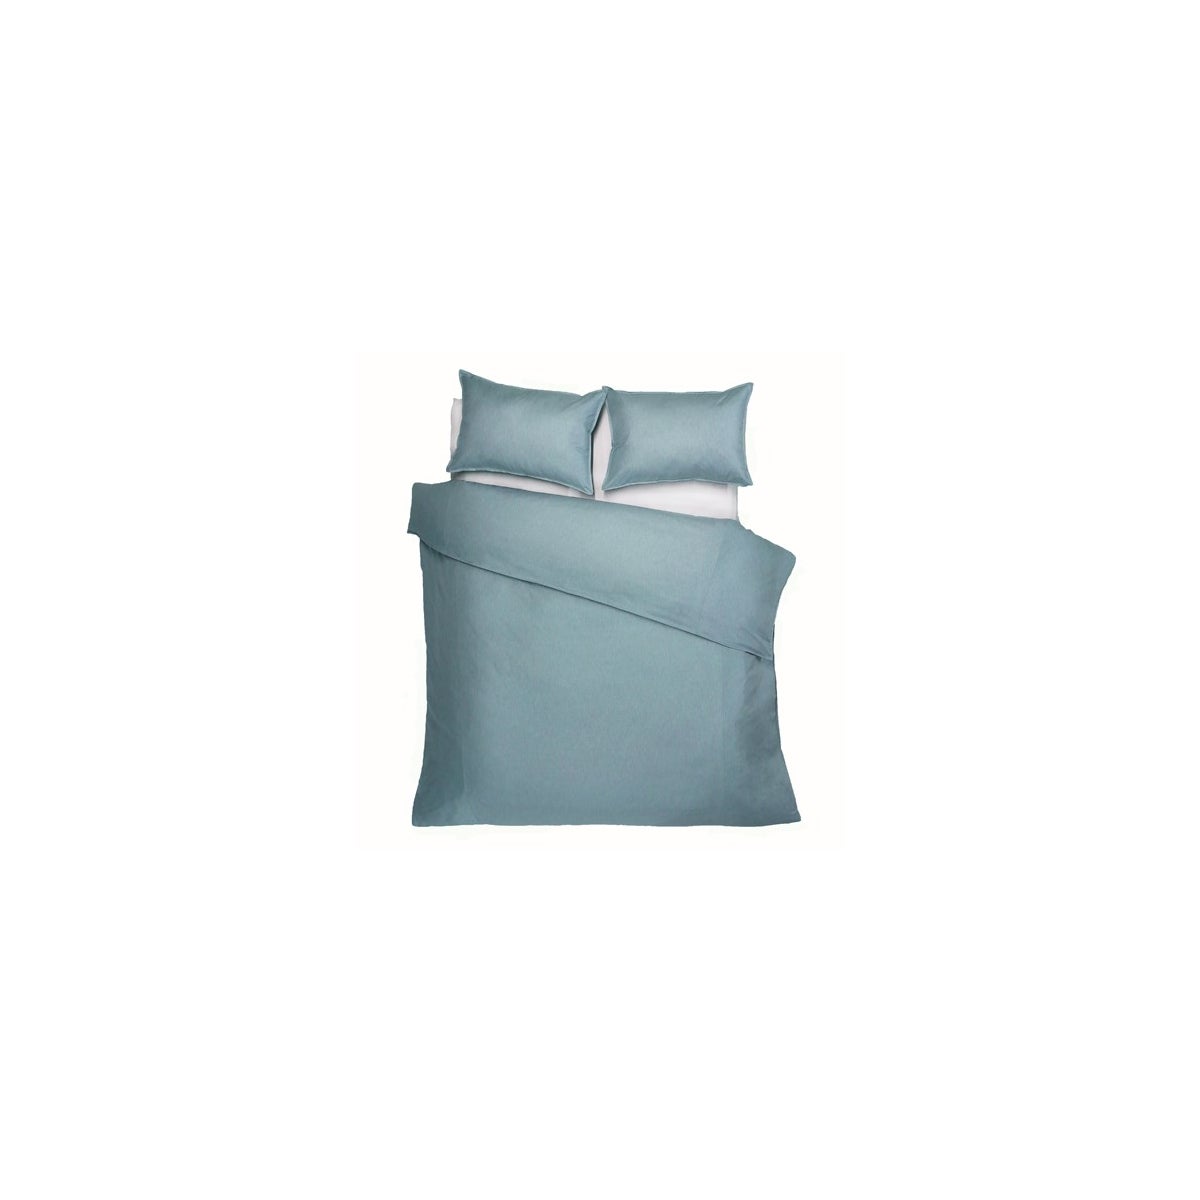 Bedford * - Sky Blue - Fabric By the Yard